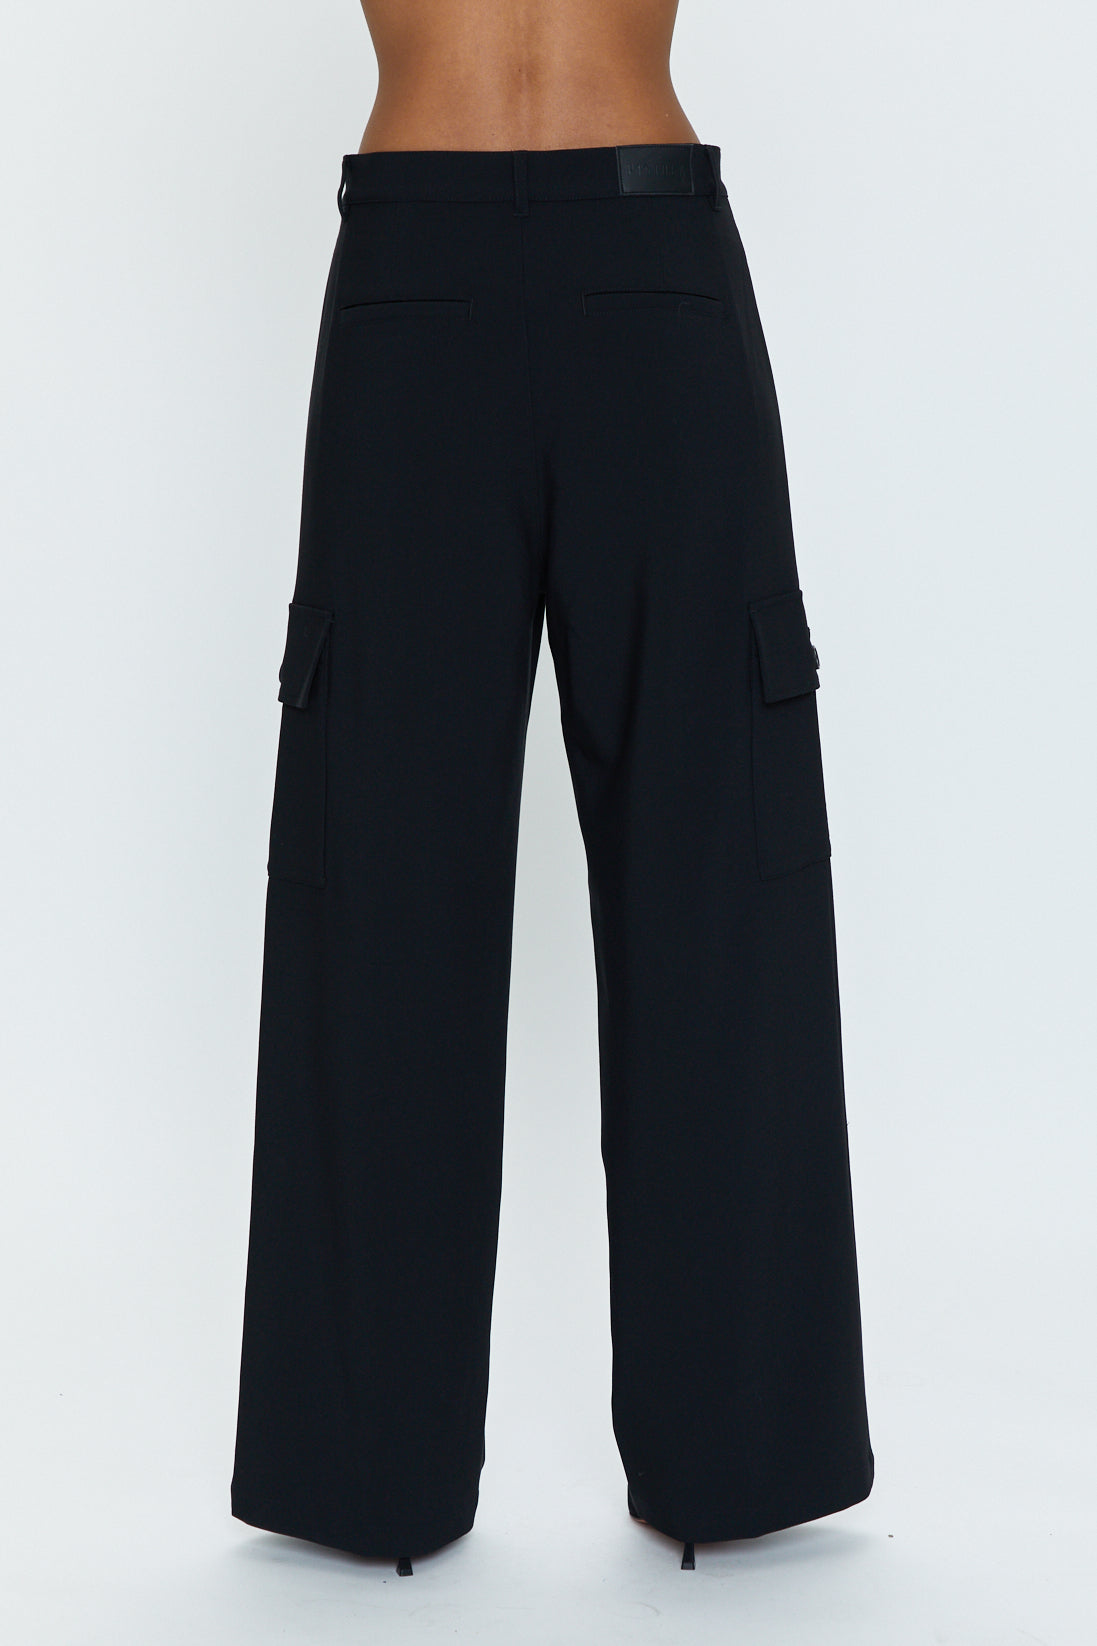 Xersion Performance Wear Semi-Fitted Black Cropped Pants Size Small